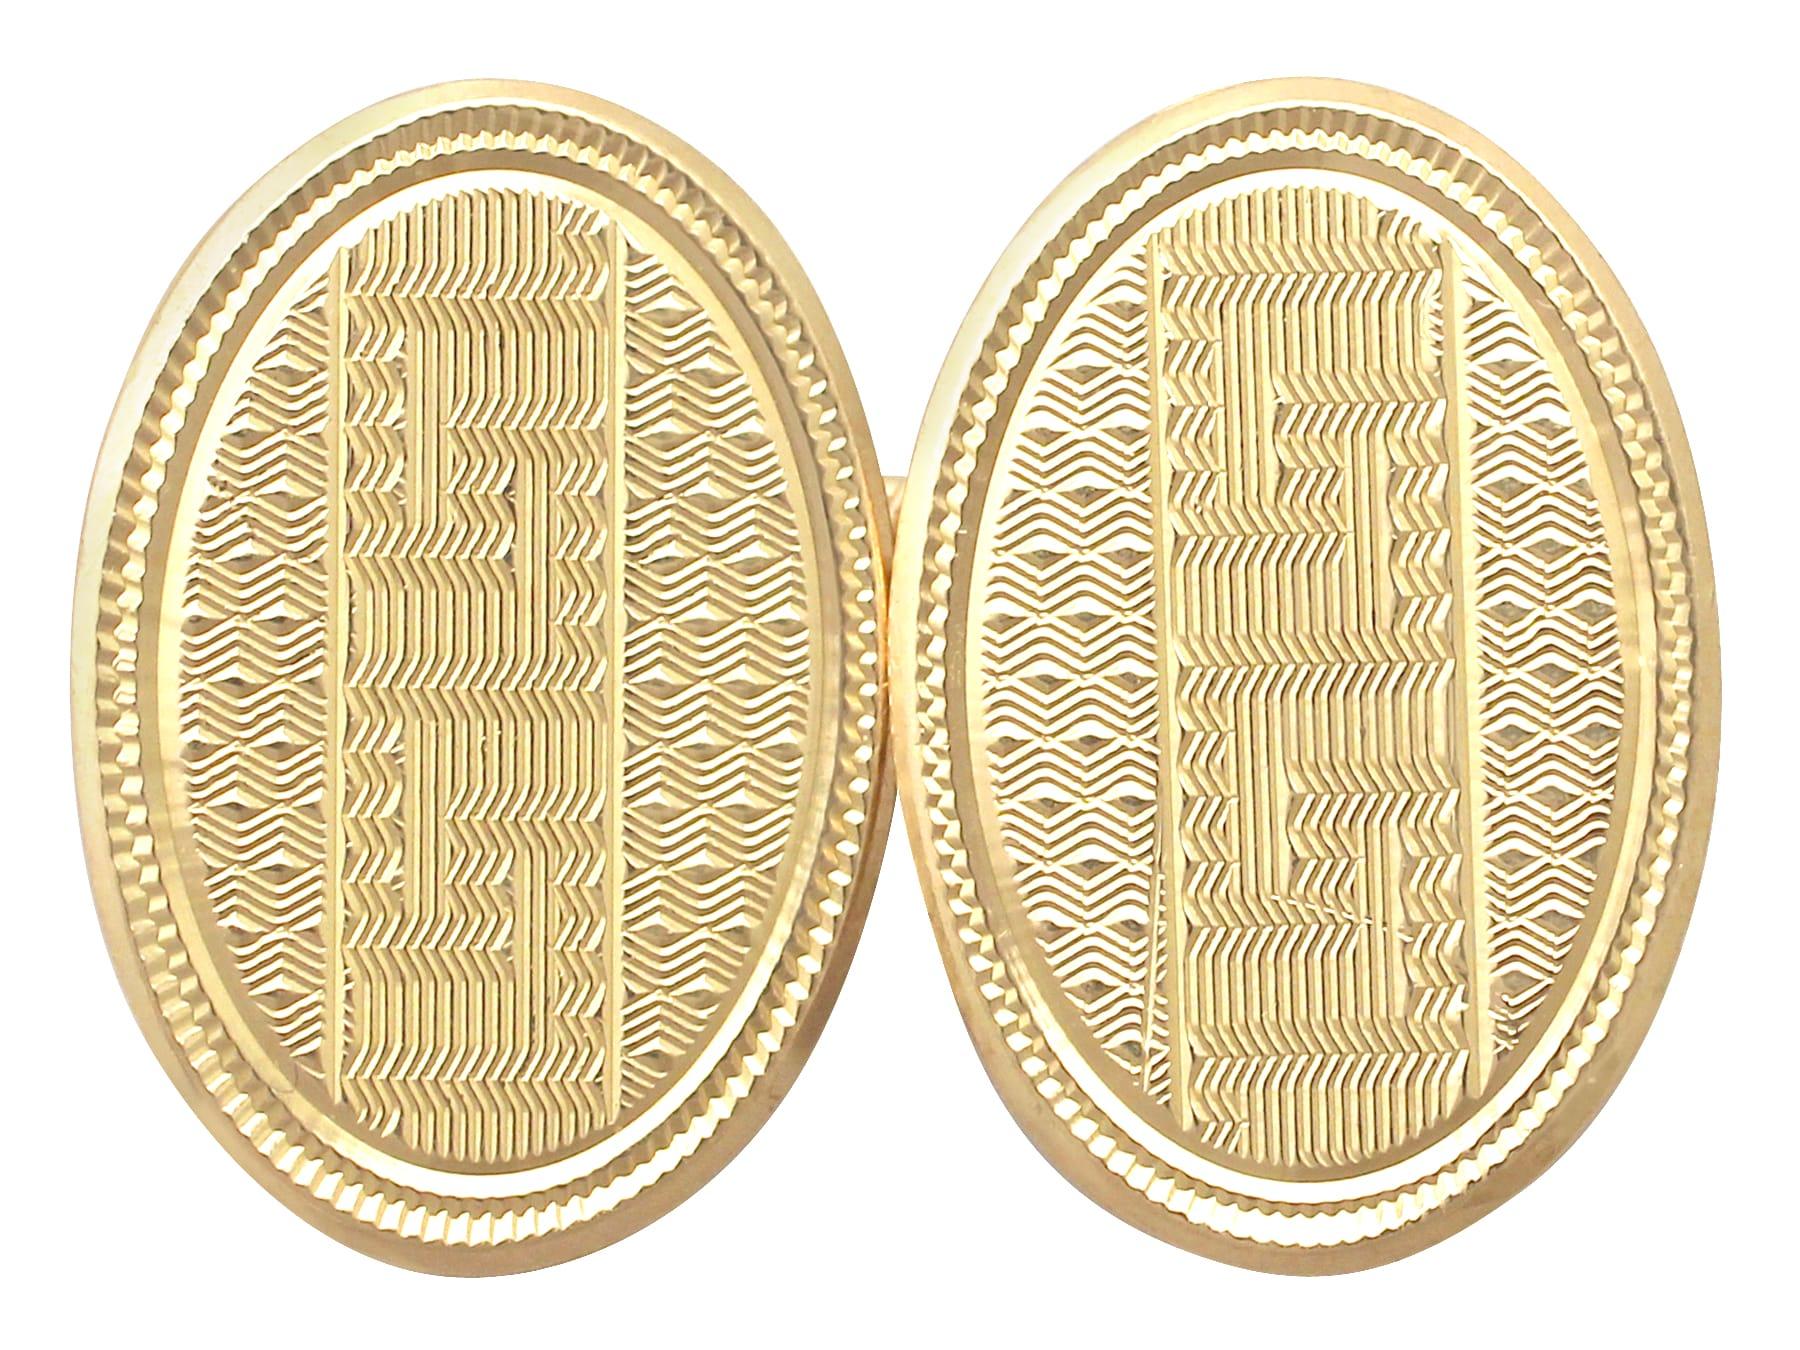 An exceptional, fine and impressive pair of 18 karat yellow gold cufflinks; part of our diverse antique jewelry and estate jewelry collections.

These stunning, fine and impressive fully hallmarked cufflinks have been crafted in 18k yellow